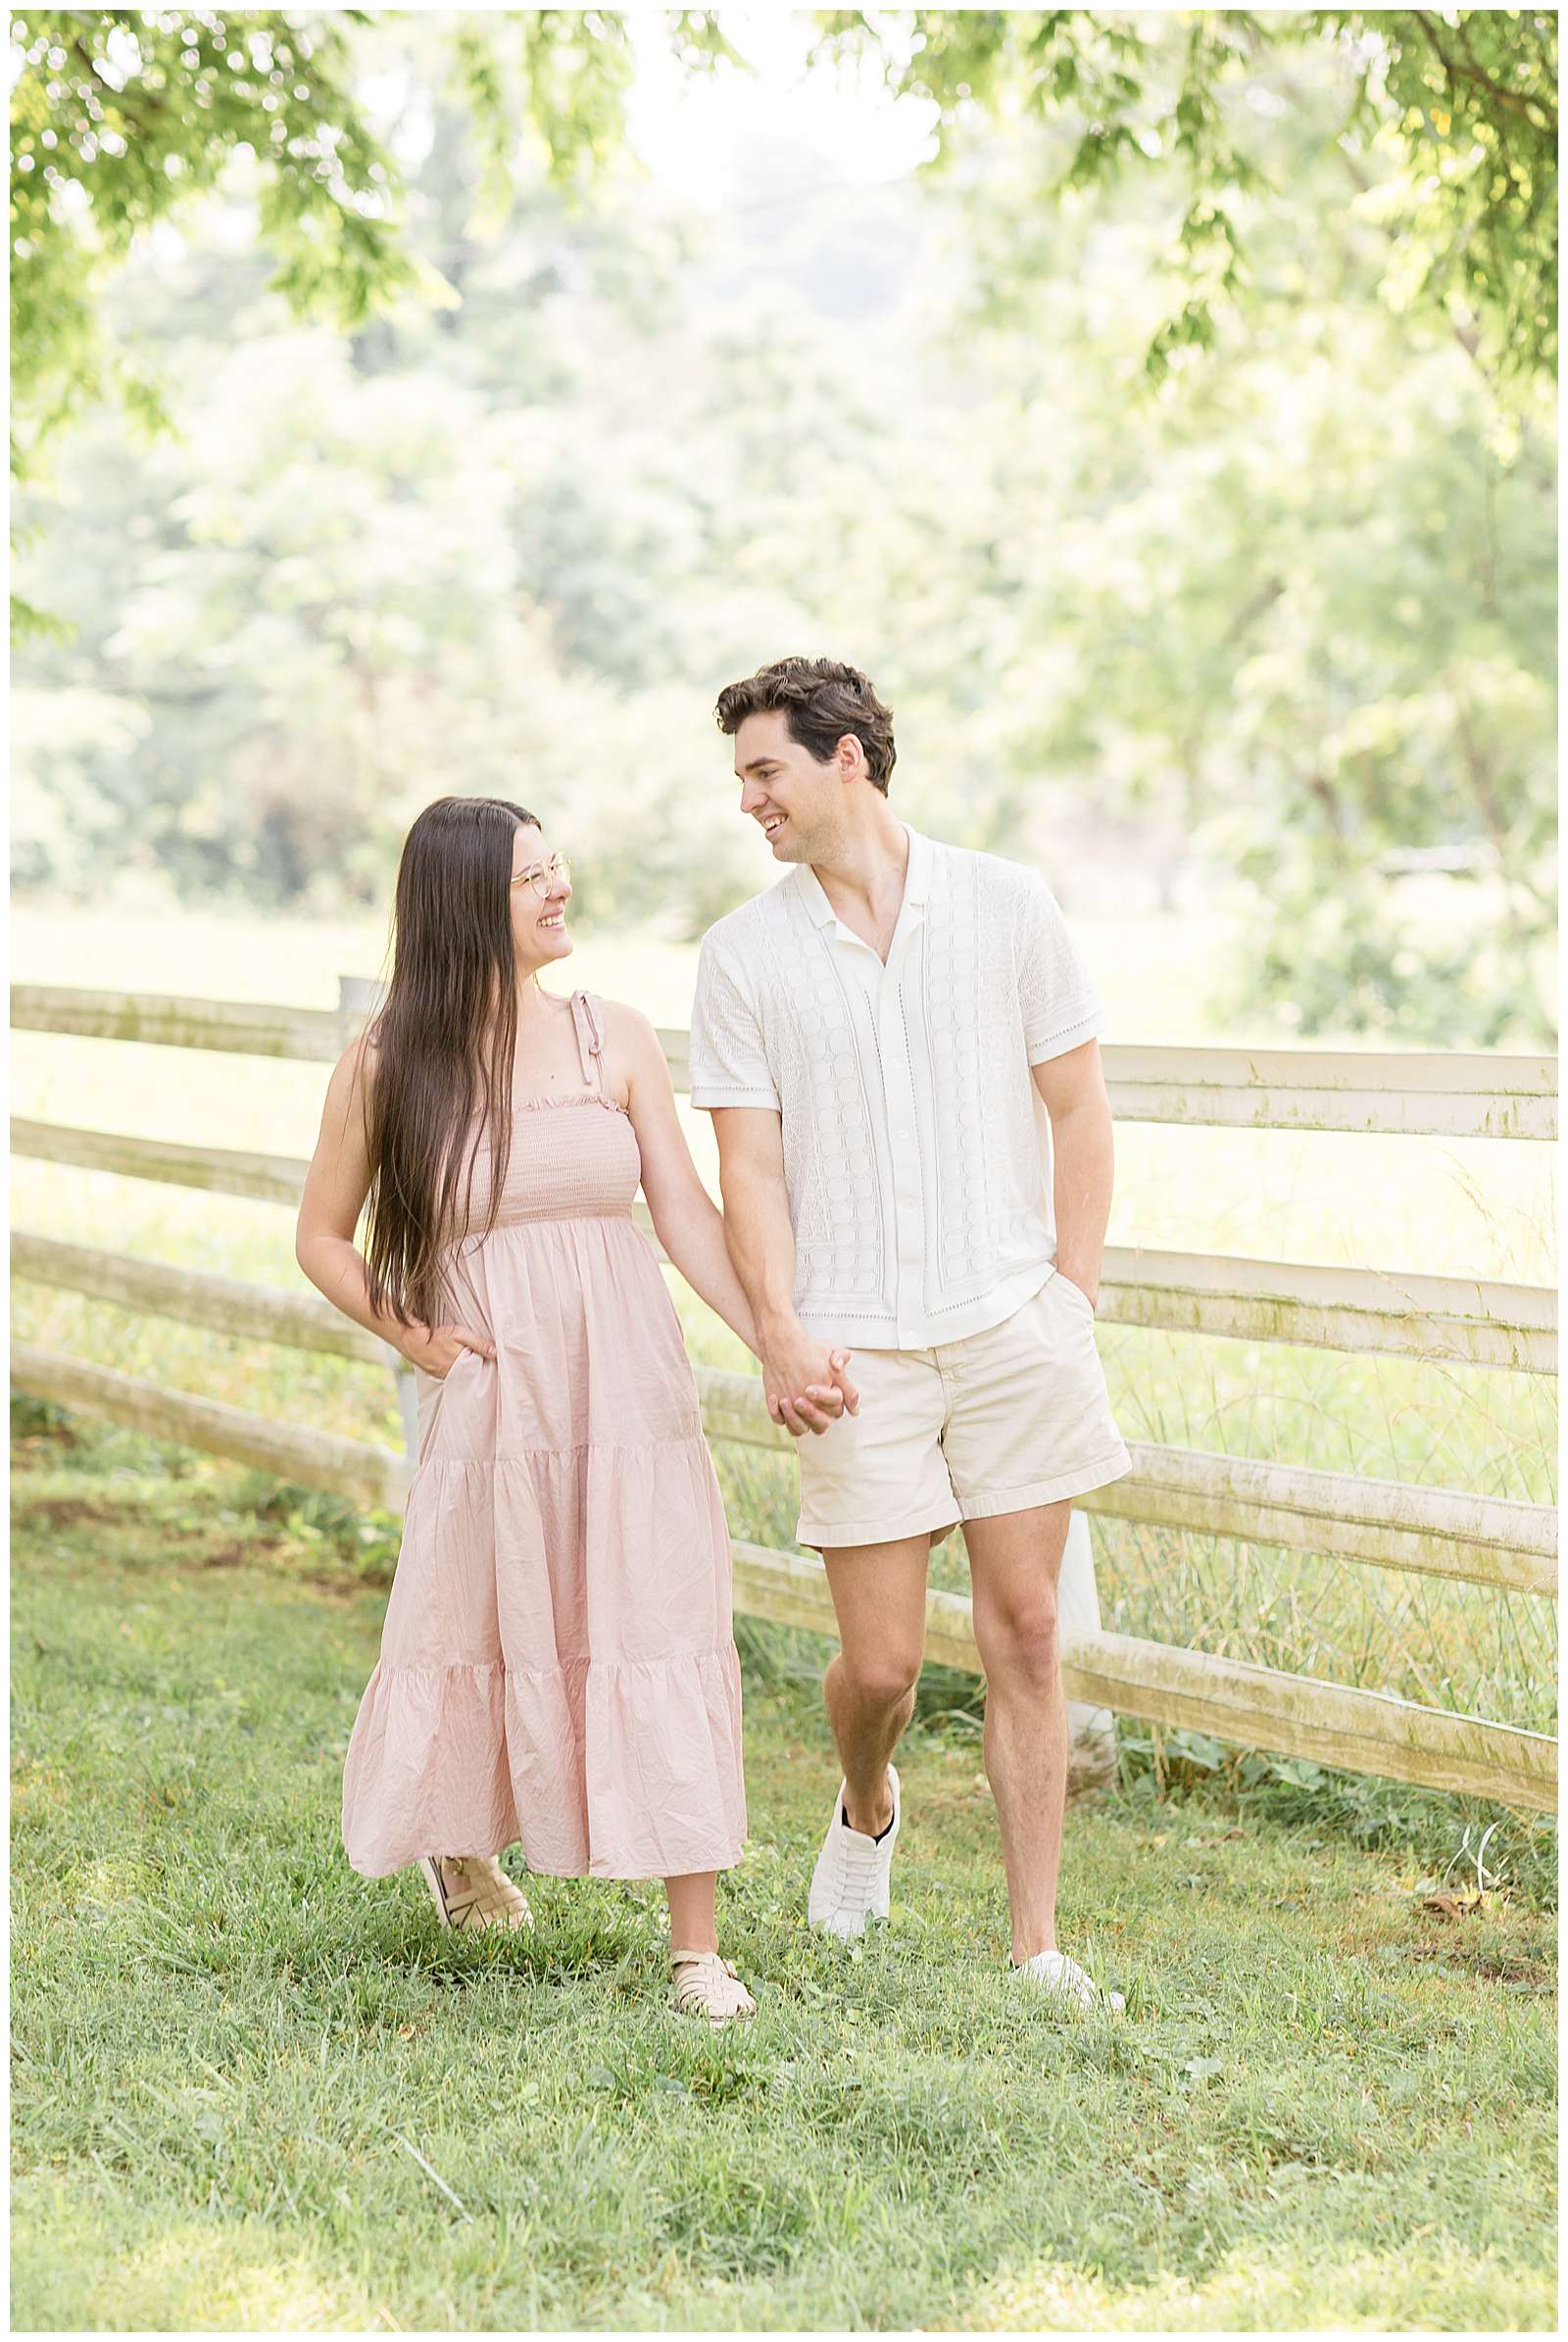 Young, new parents hold hands and walk together along a fence line smiling at each other. The girl wears a spaghetti strap blush, maxi dress, and her husband wears a white, button down shirt and light, khaki shorts. They walk together during Rebecca Rice's Behind the Lens Membership for her photography education! Check out this session and more about Behind the Lens on the blog today! -rebeccaricephoto.com